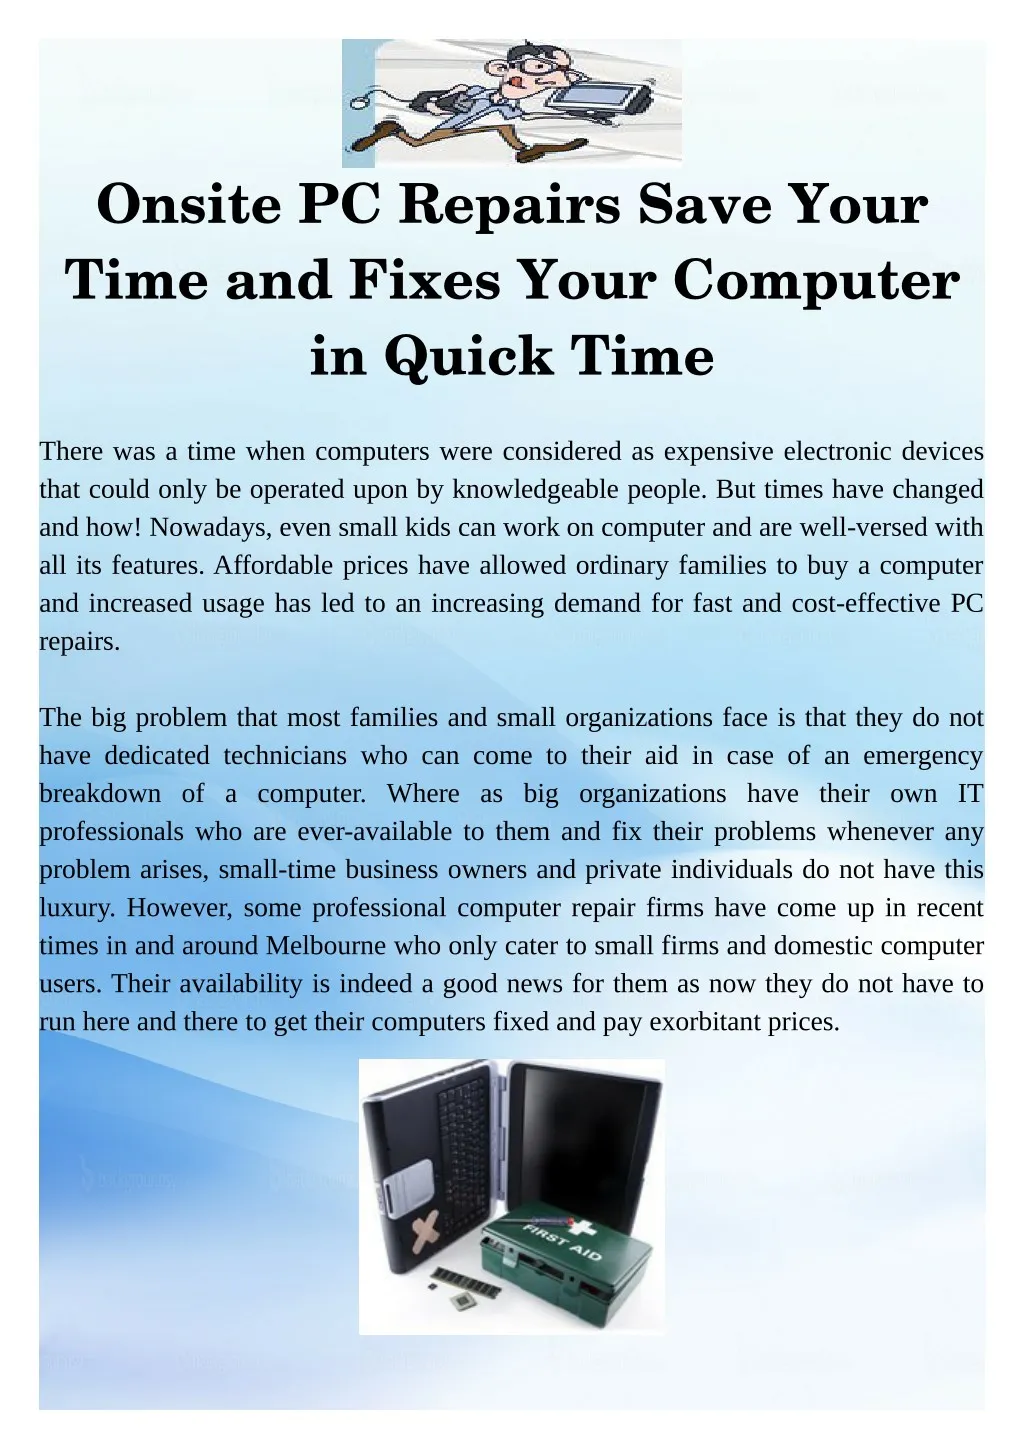 onsite pc repairs save your time and fixes your